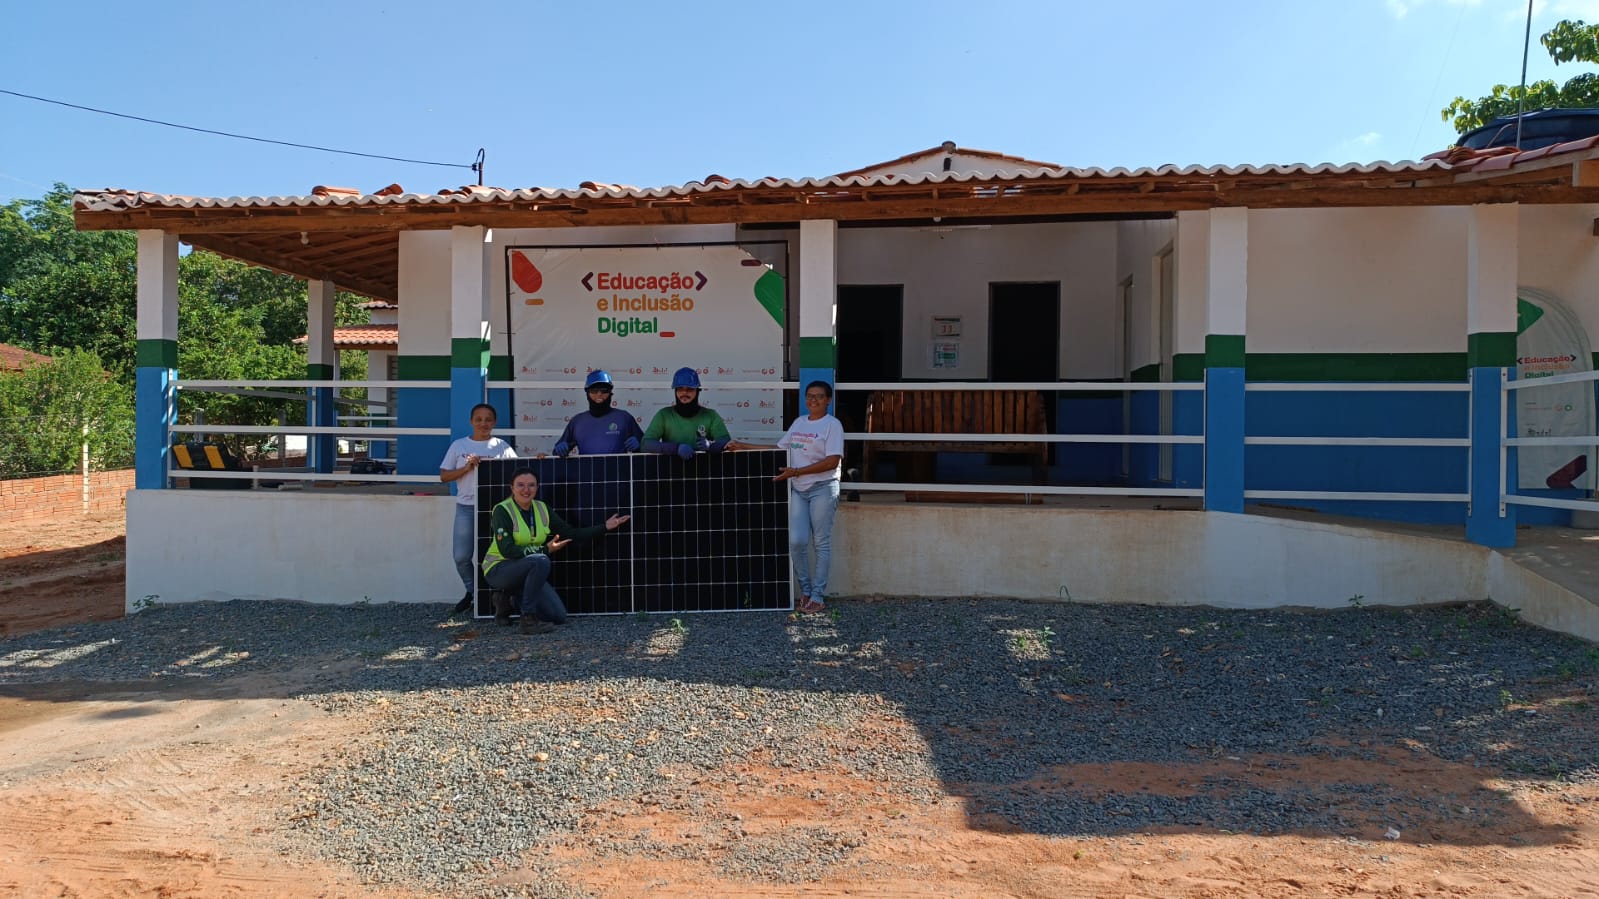 School teachers and Installers with new solar panels for the school